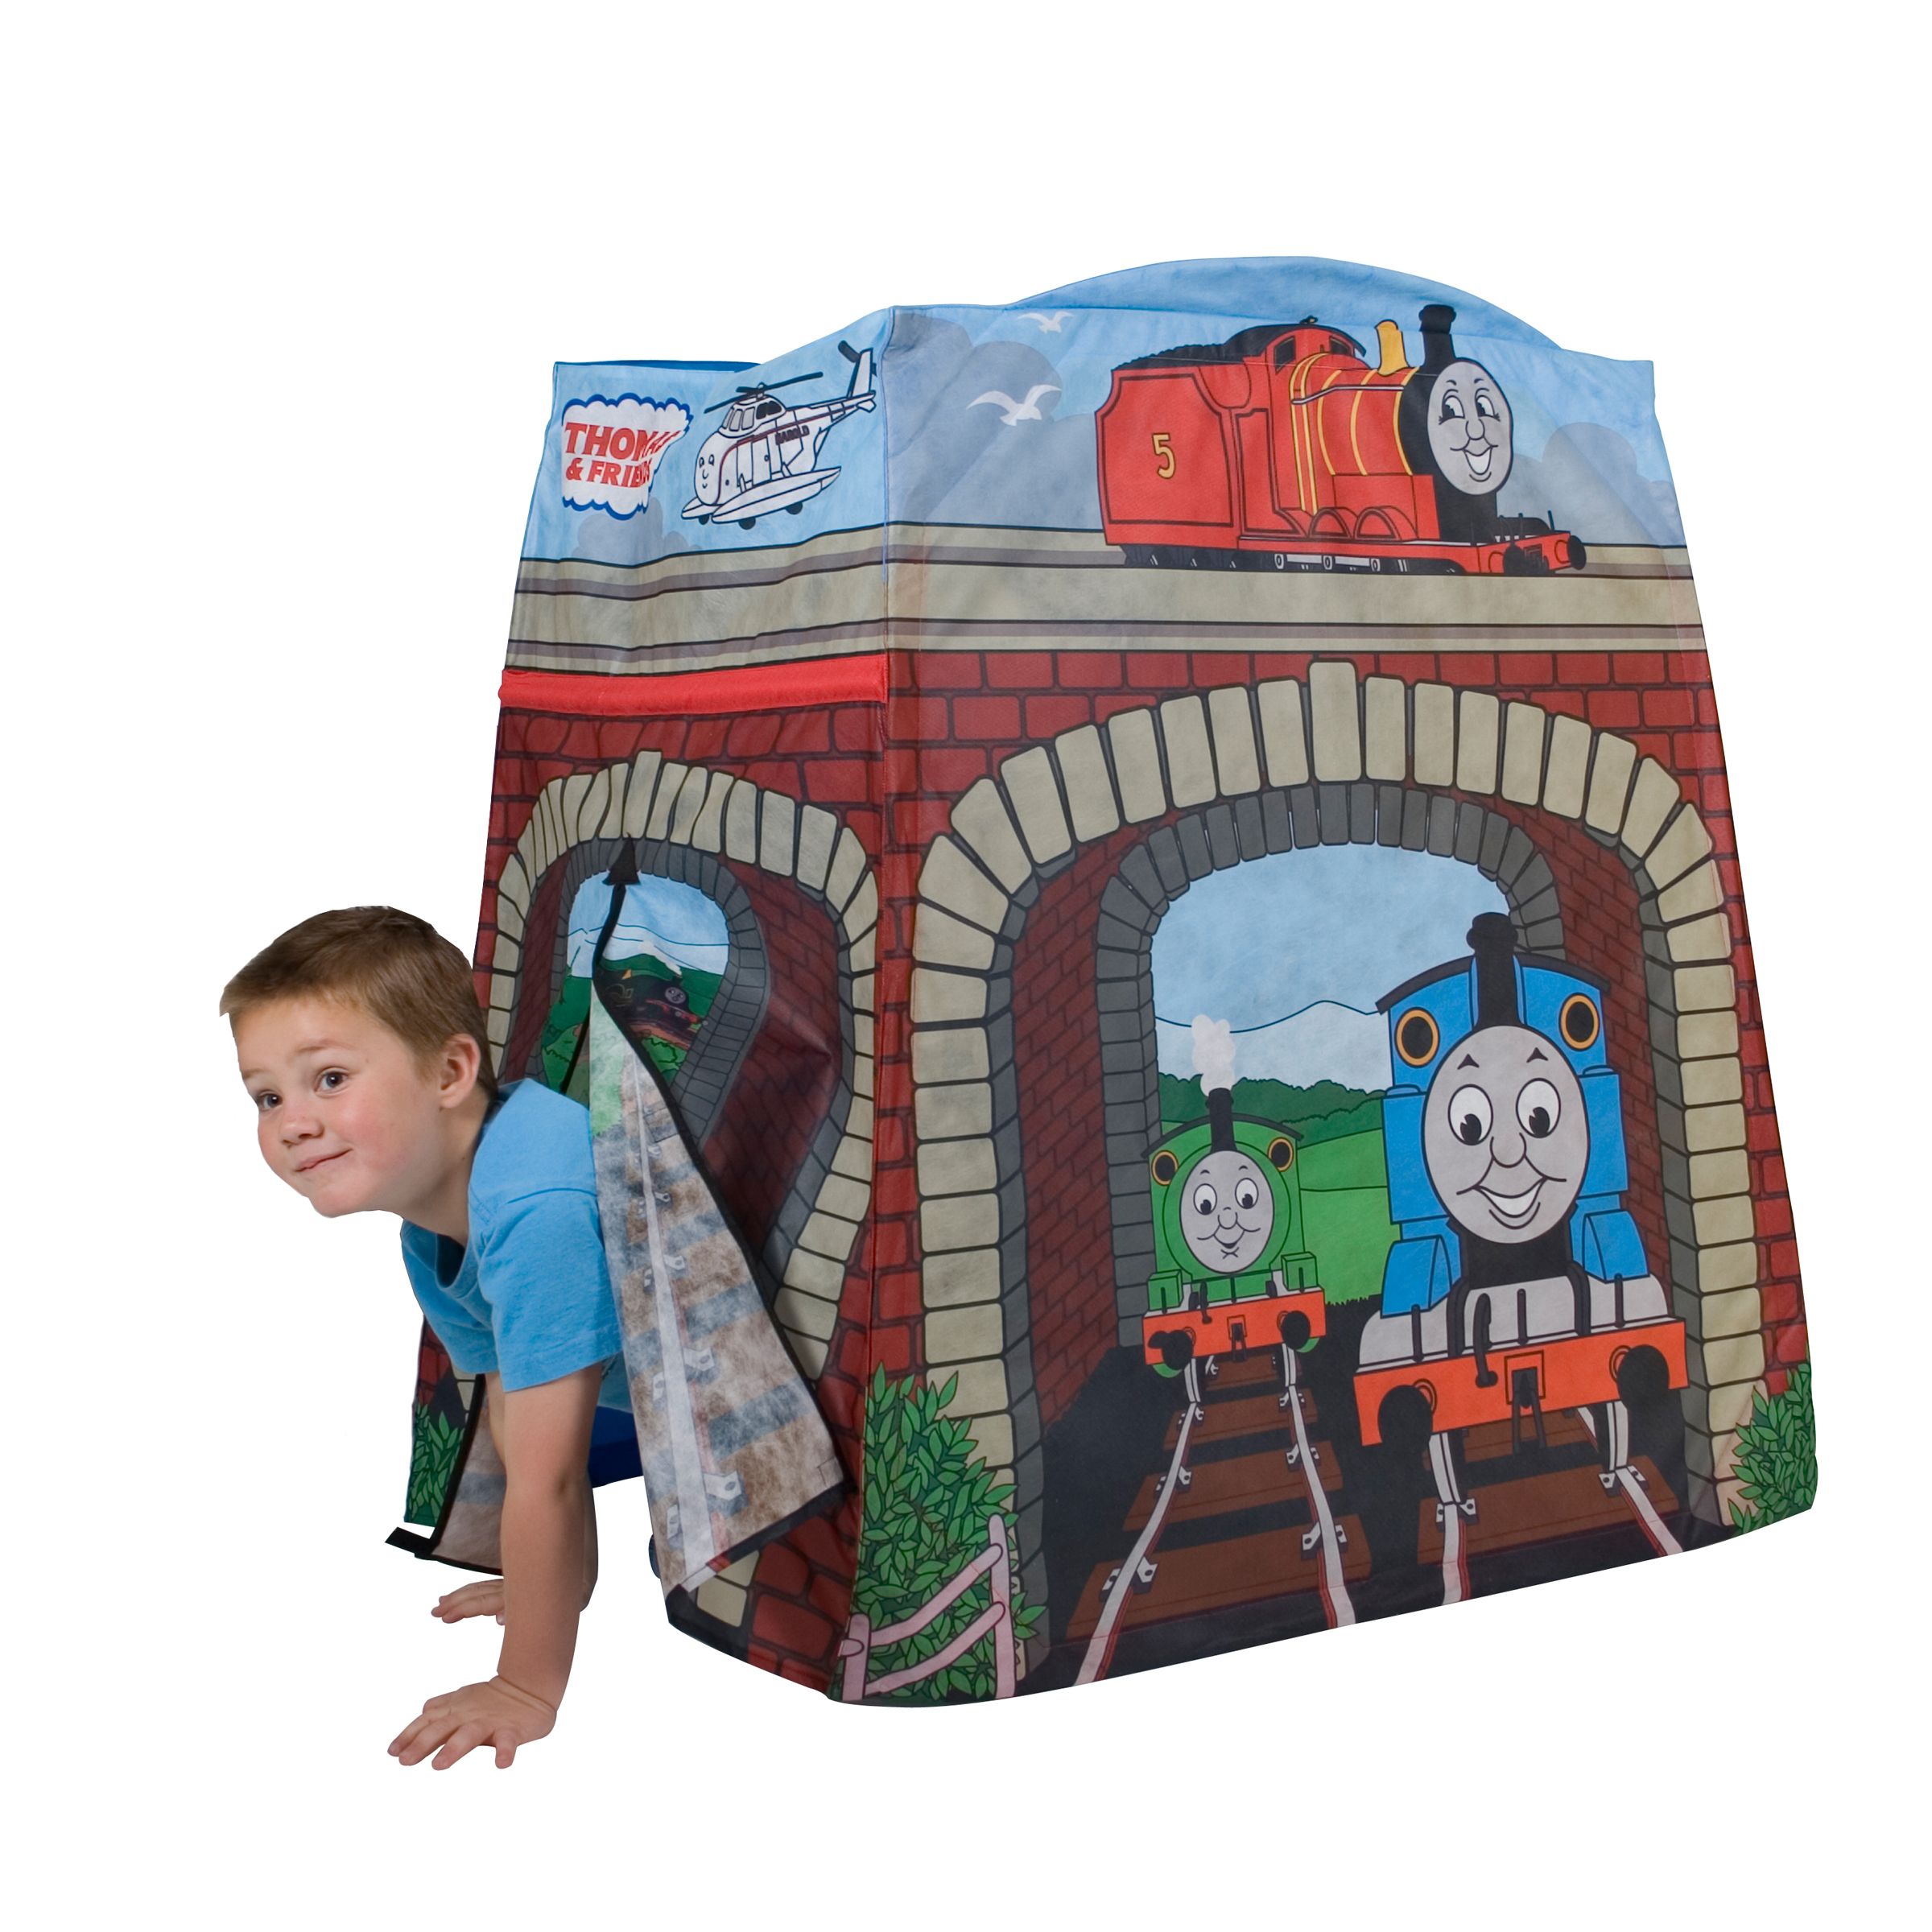 Thomas the Tank Engine Hideaway Tent